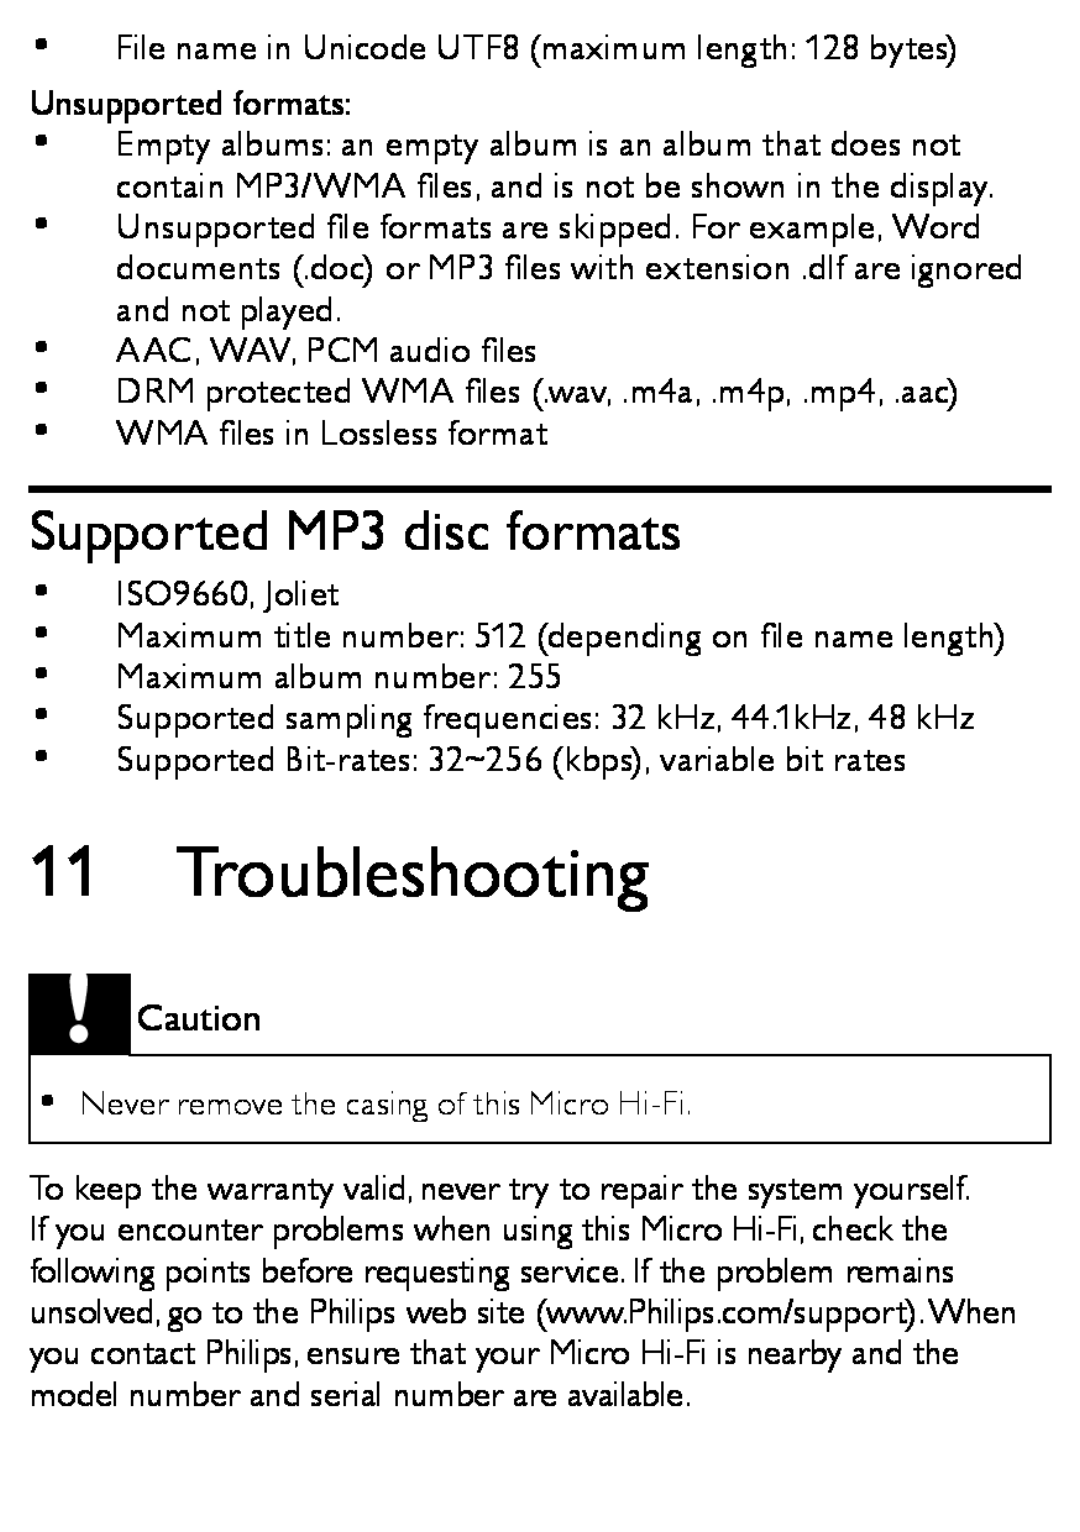 Philips MCM166 user manual Troubleshooting, Supported MP3 disc formats 